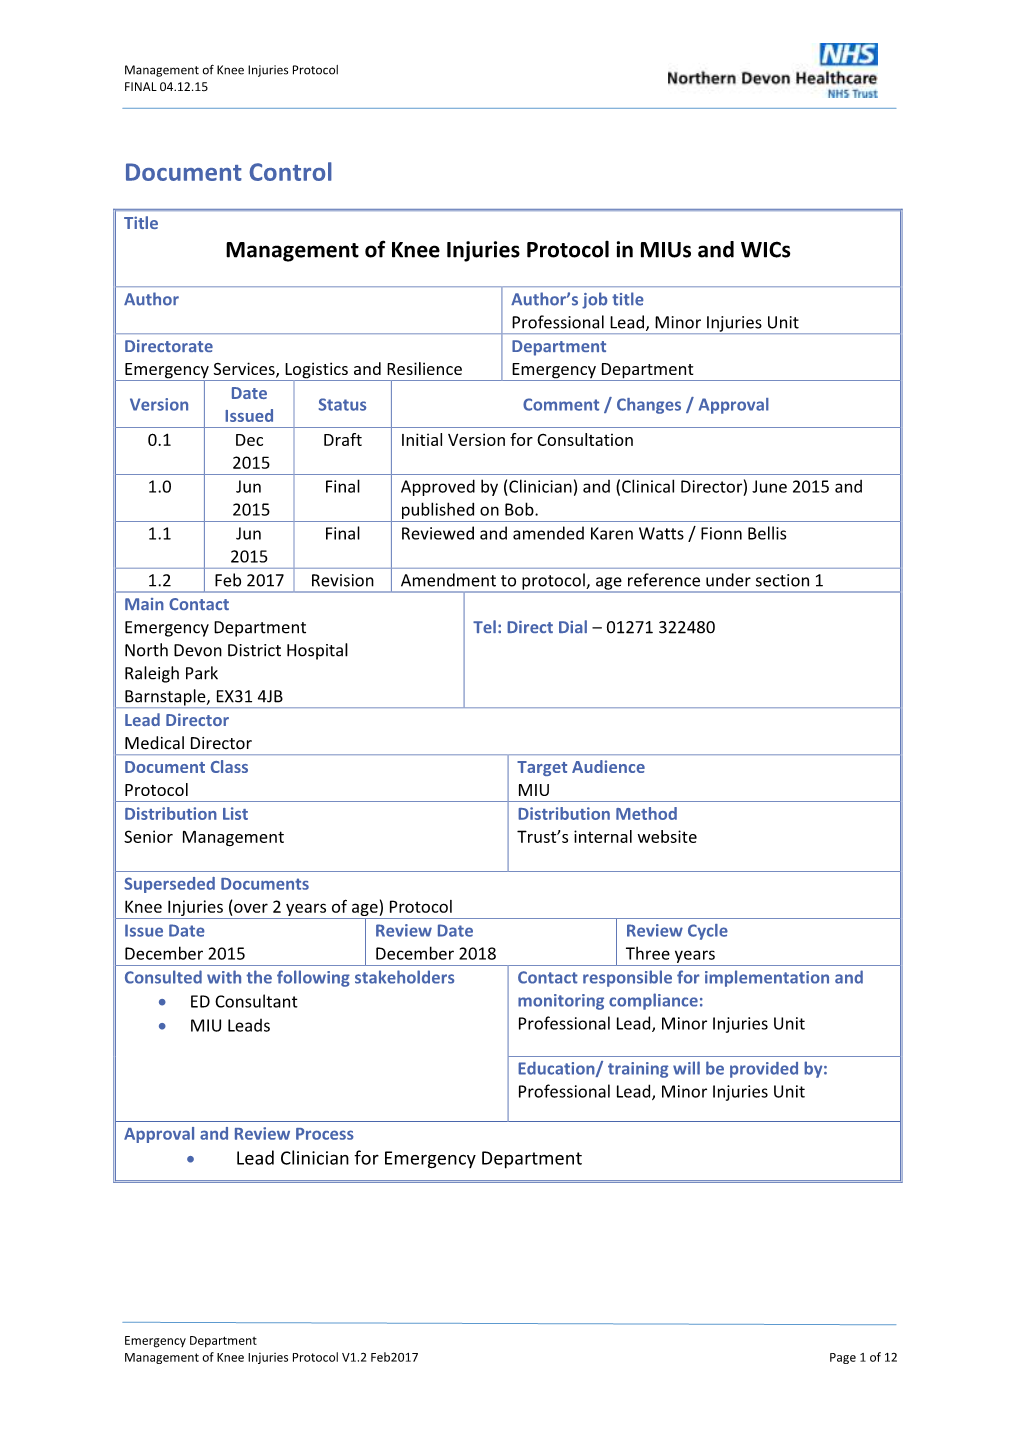 Management of Knee Injuries Protocol in Mius and Wics